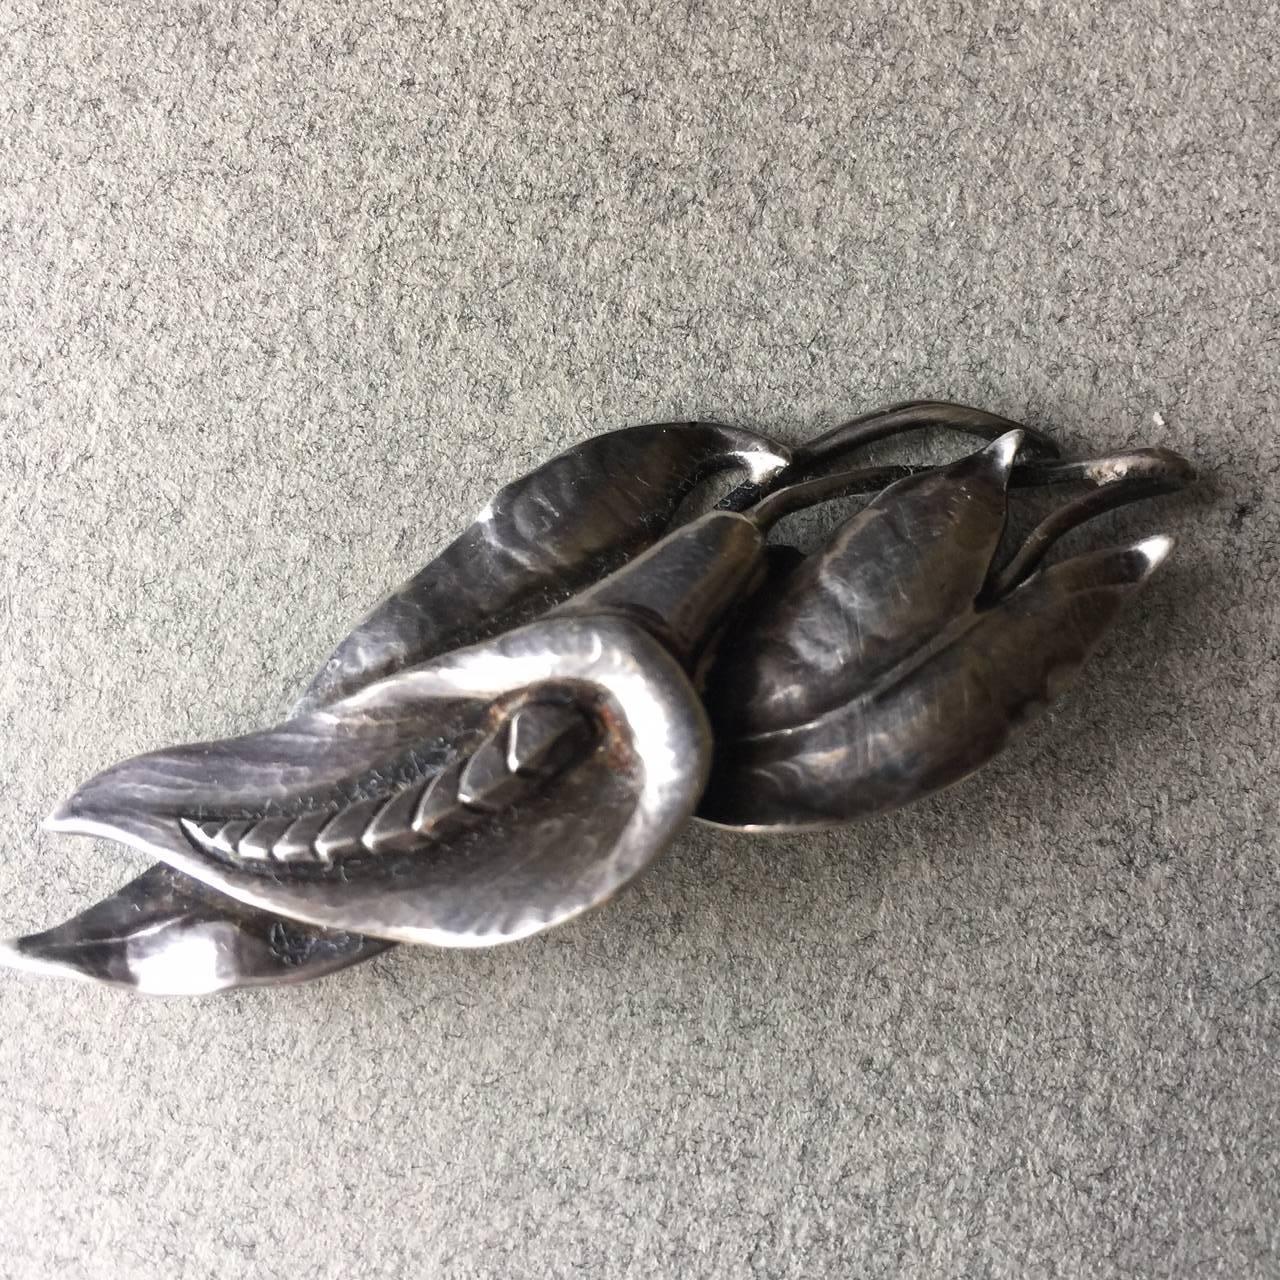 Peer Smed Sterling Silver Calla Lily Brooch.

Signed and hallmarked handwrought Peer Smed Sterling Silver Brooch. This  wonderful Calla Lily with a long, curving stamen resting against several leafs and stems. Very dimensional and well made. 